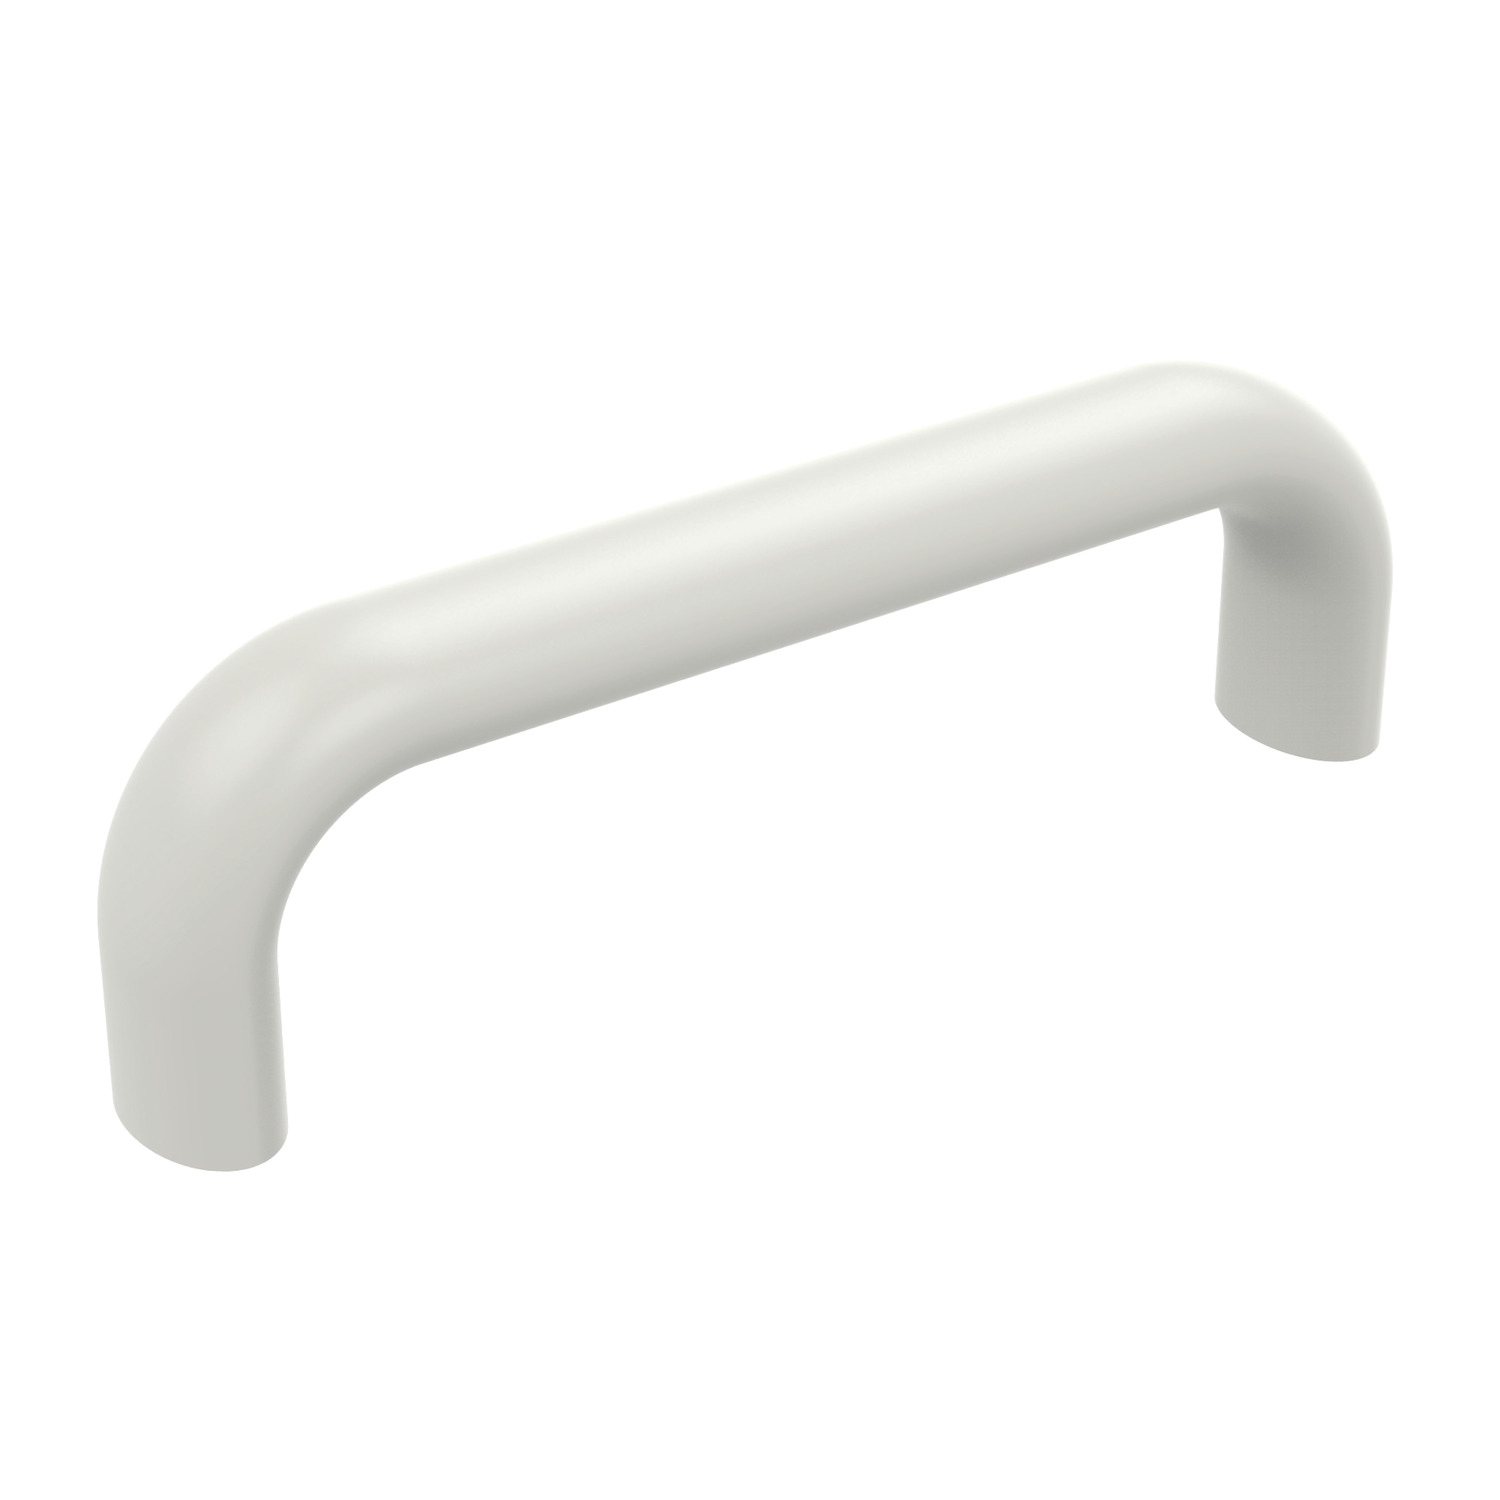 Pull Handles Clean line pull handles, tube handles and knobs especially suited for the medical and food industry. Temperature resistant -40 degrees to +150 degrees C.